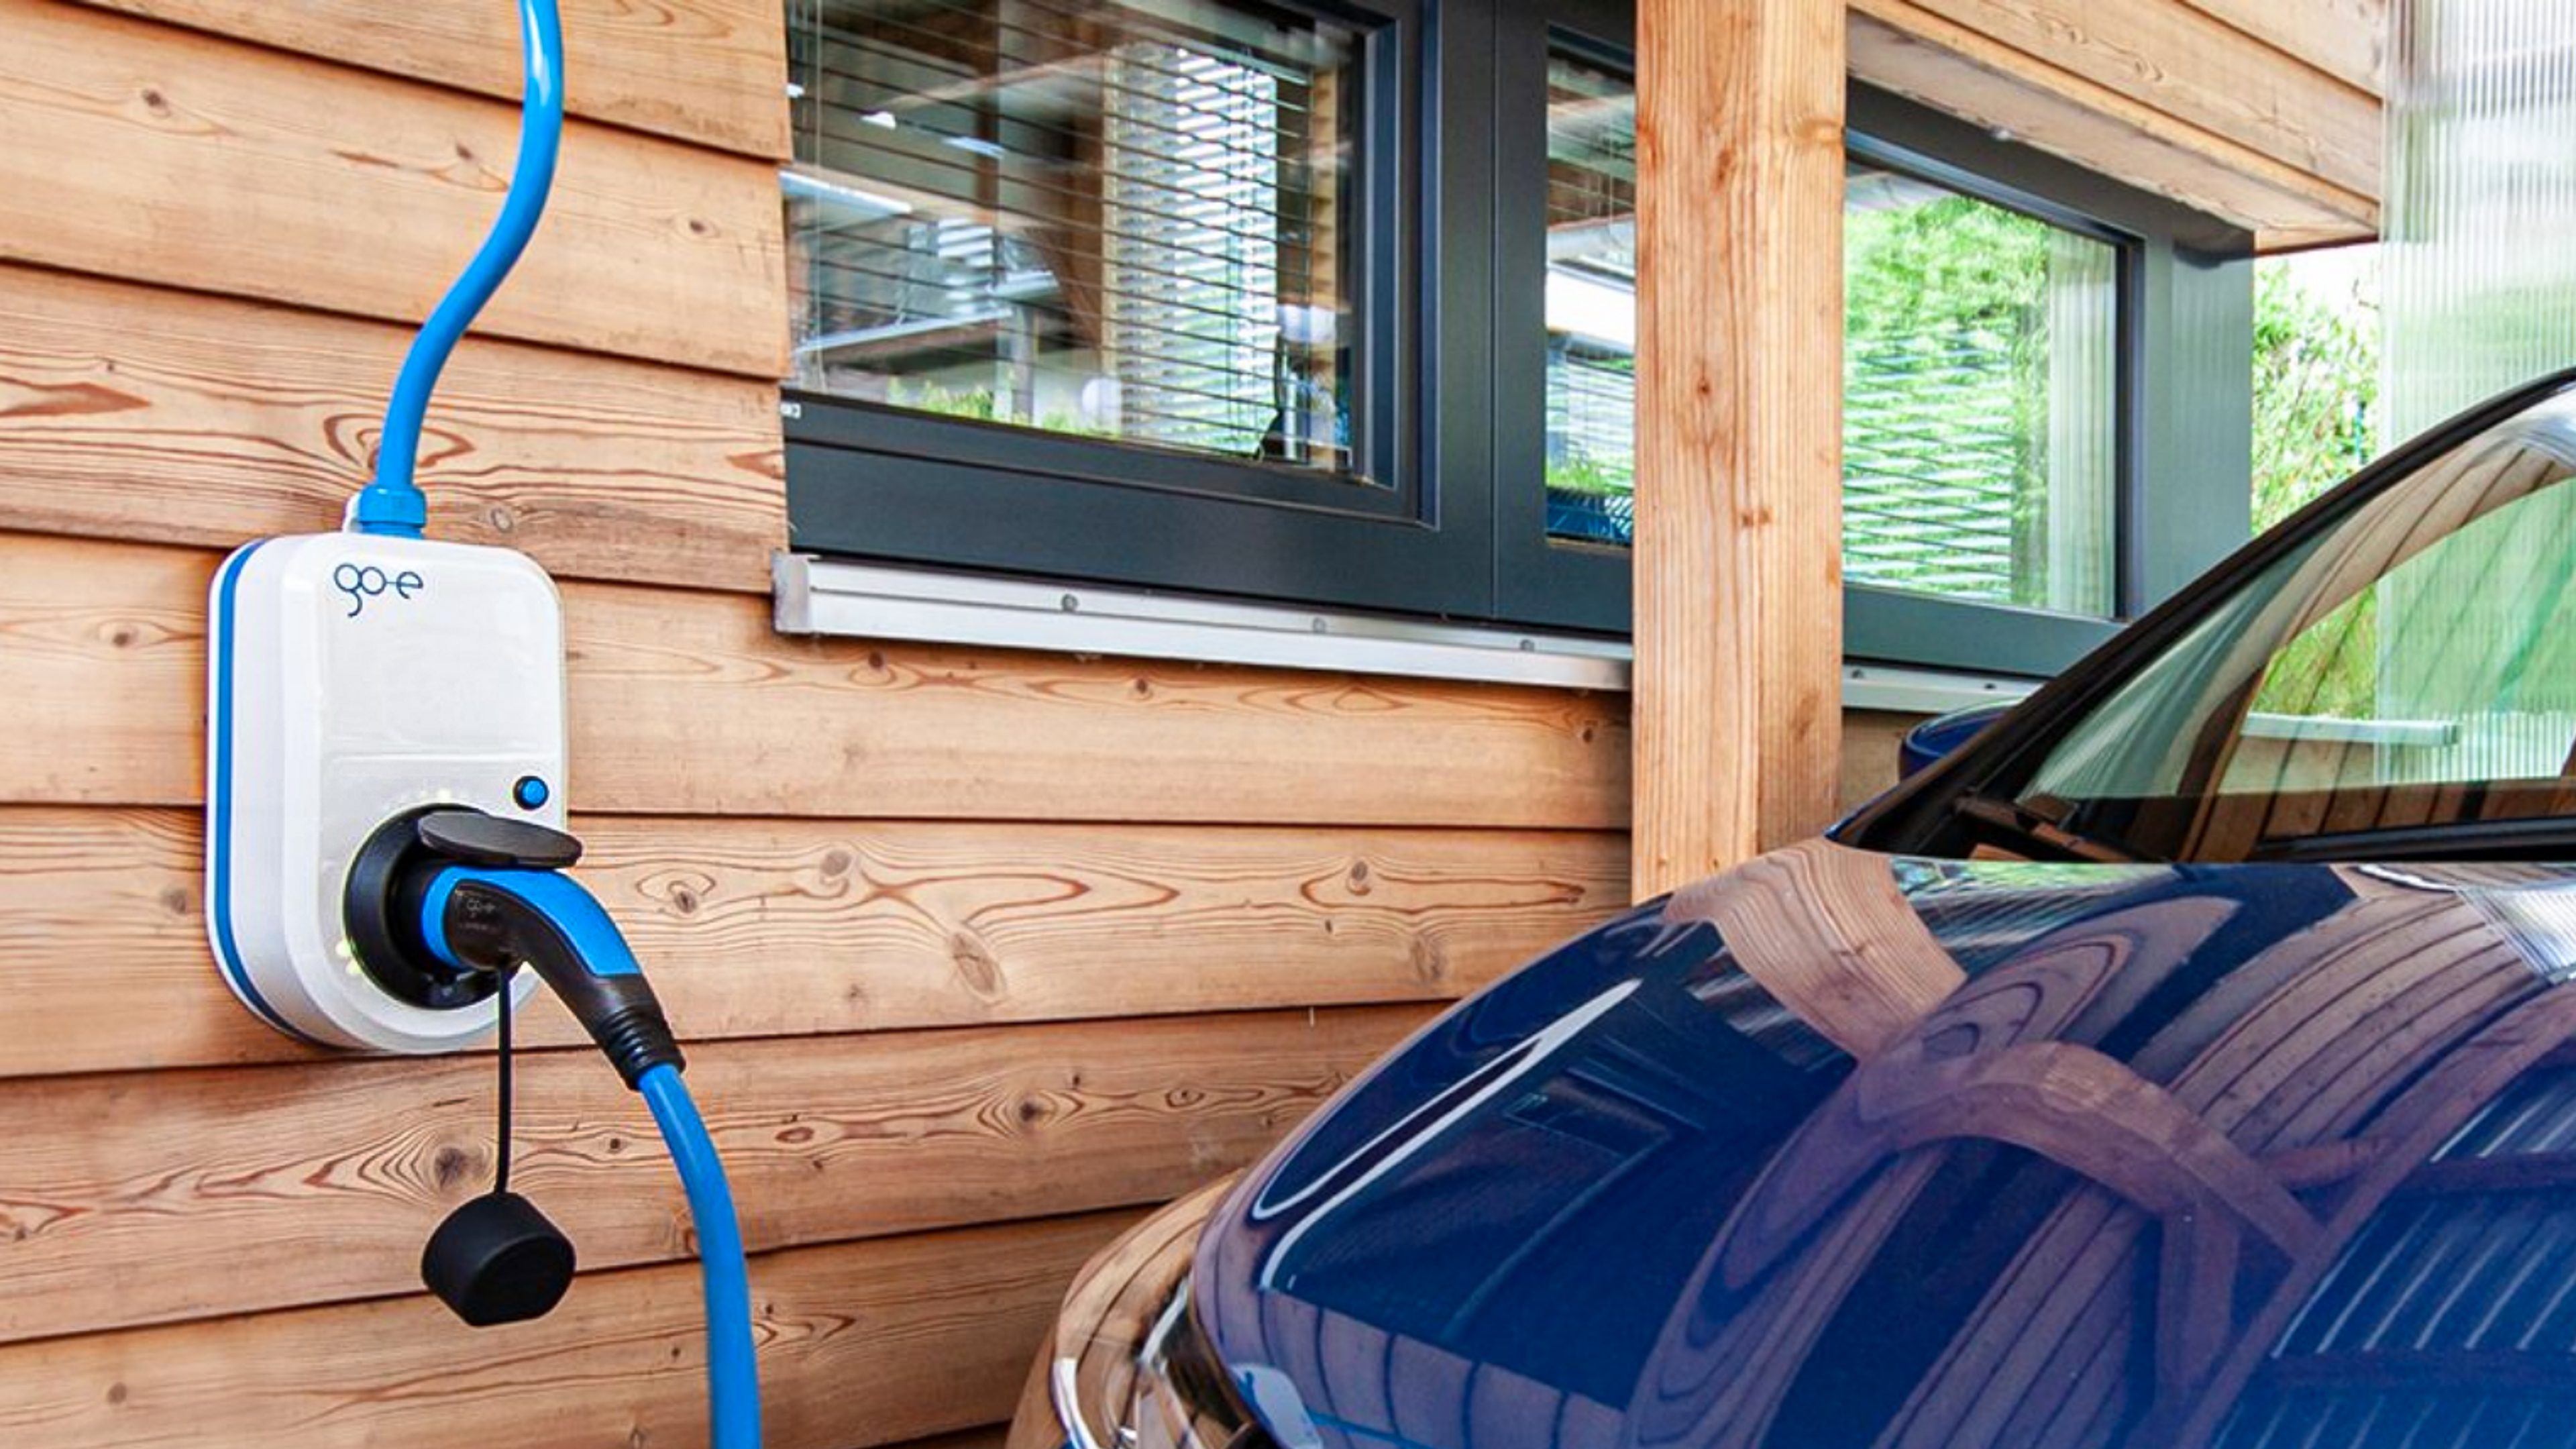 Installing an EV Charger at My House Was Easy - CNET